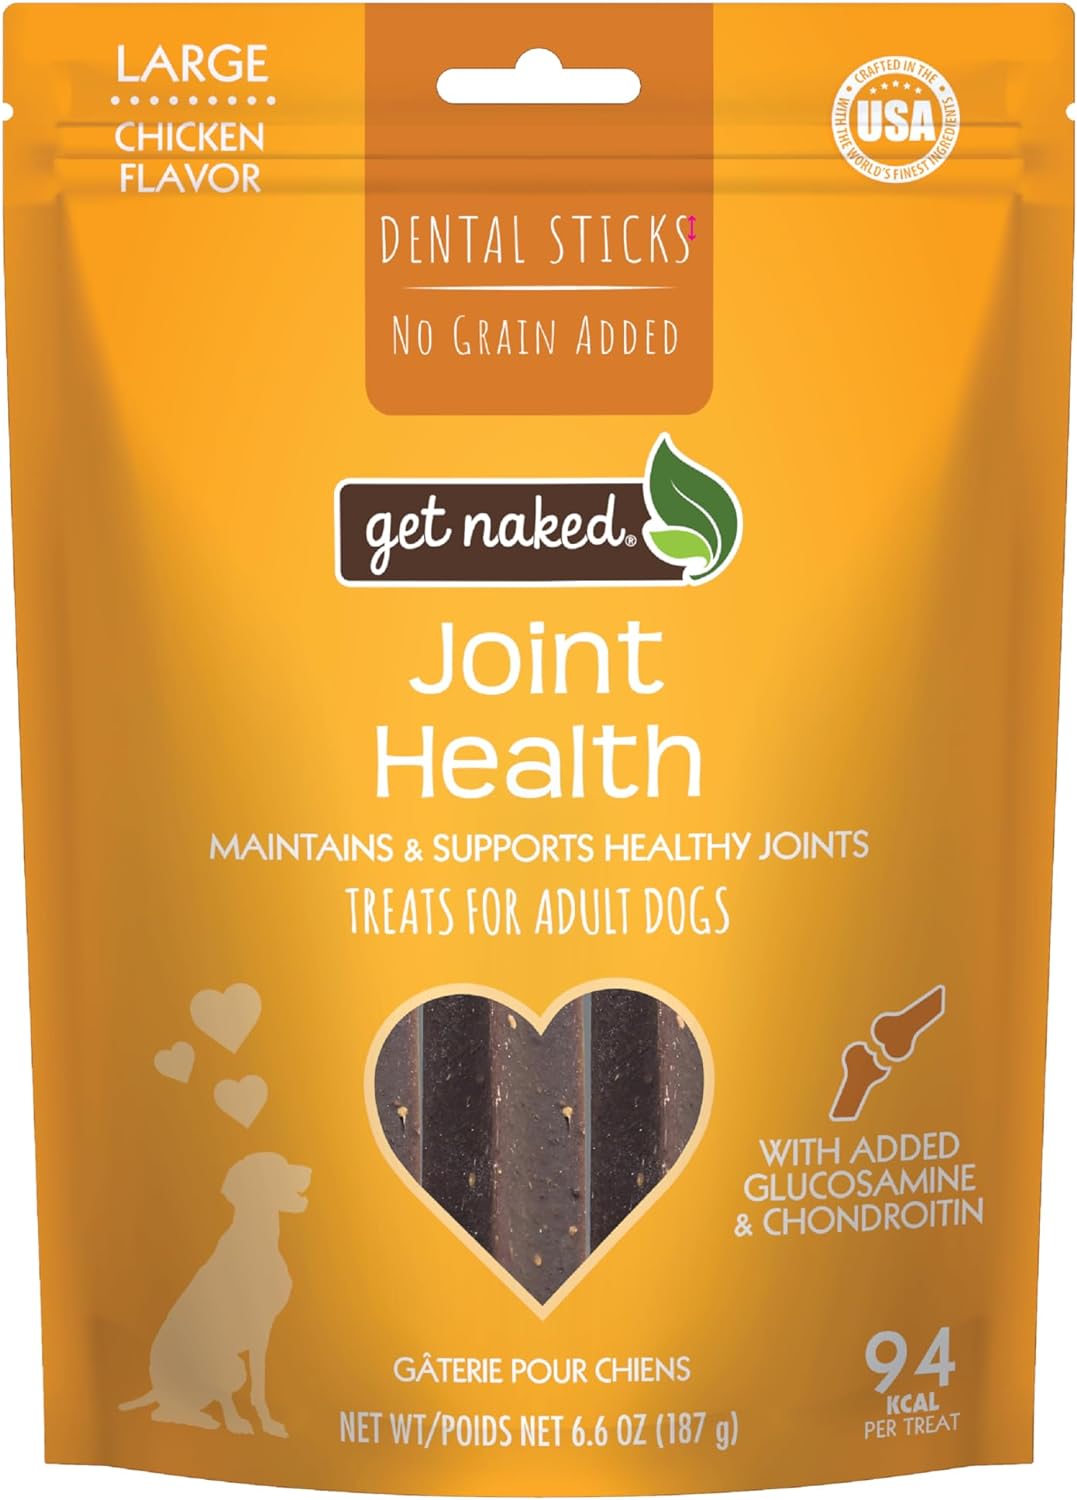 Get Naked Grain Free 1 Pouch 6.6 Oz Joint Health Dental Chew Sticks, Large